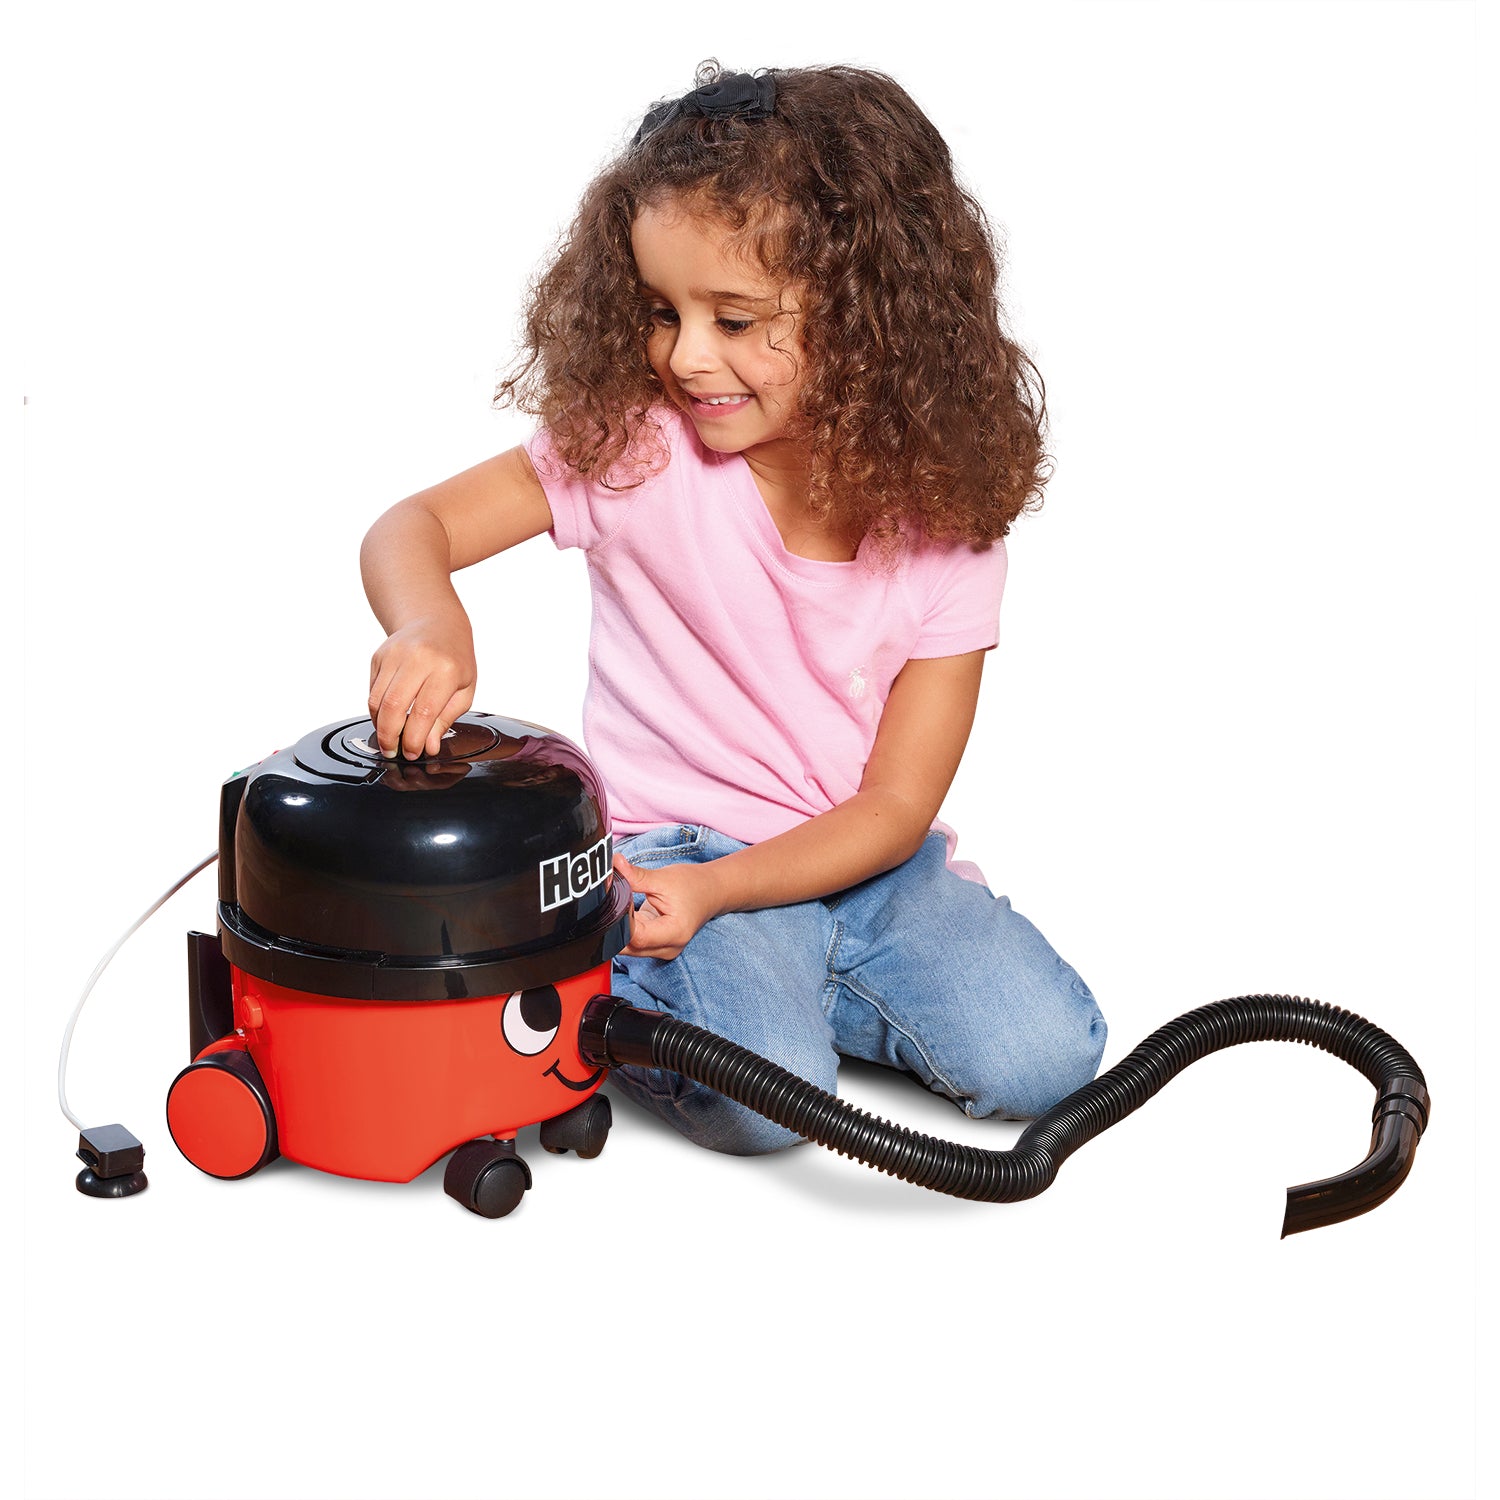 Casdon - Henry Vacuum Cleaner Toy